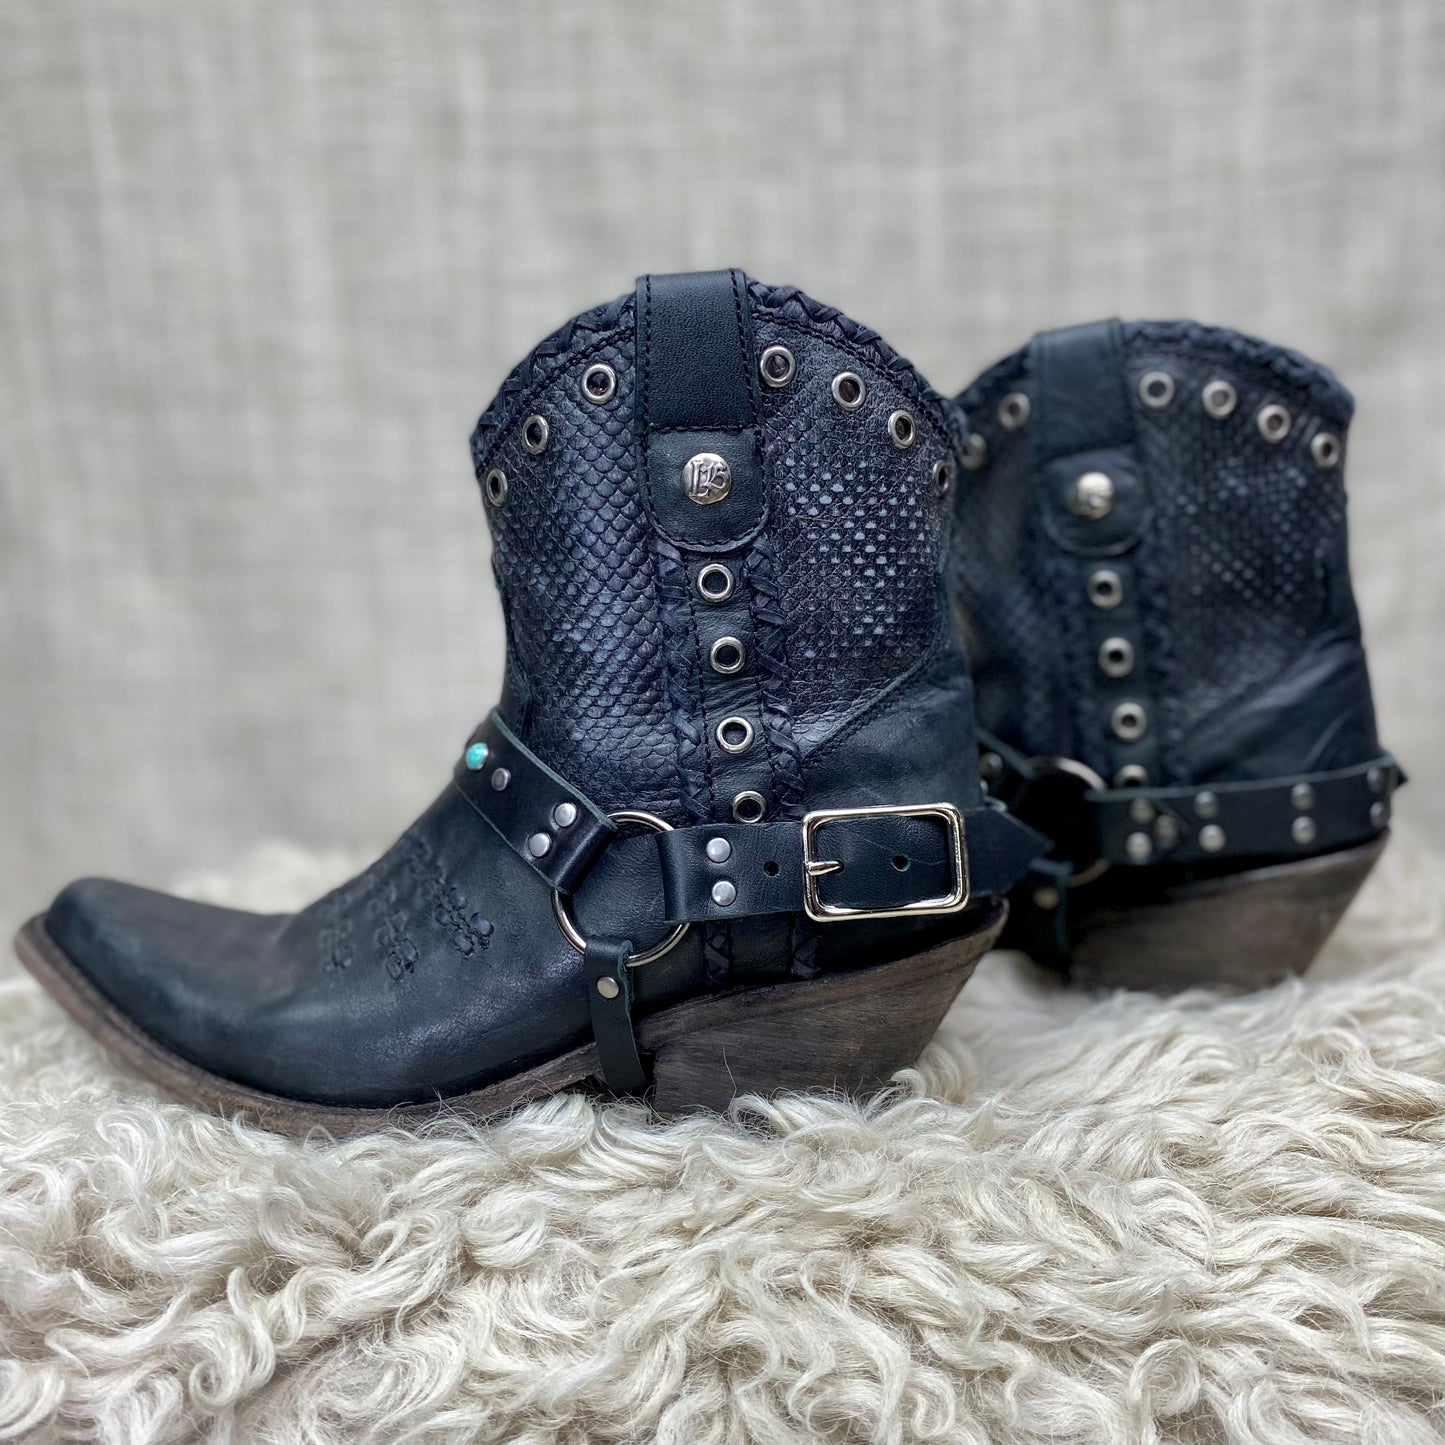 Black Leather & Turquoise Boot Straps